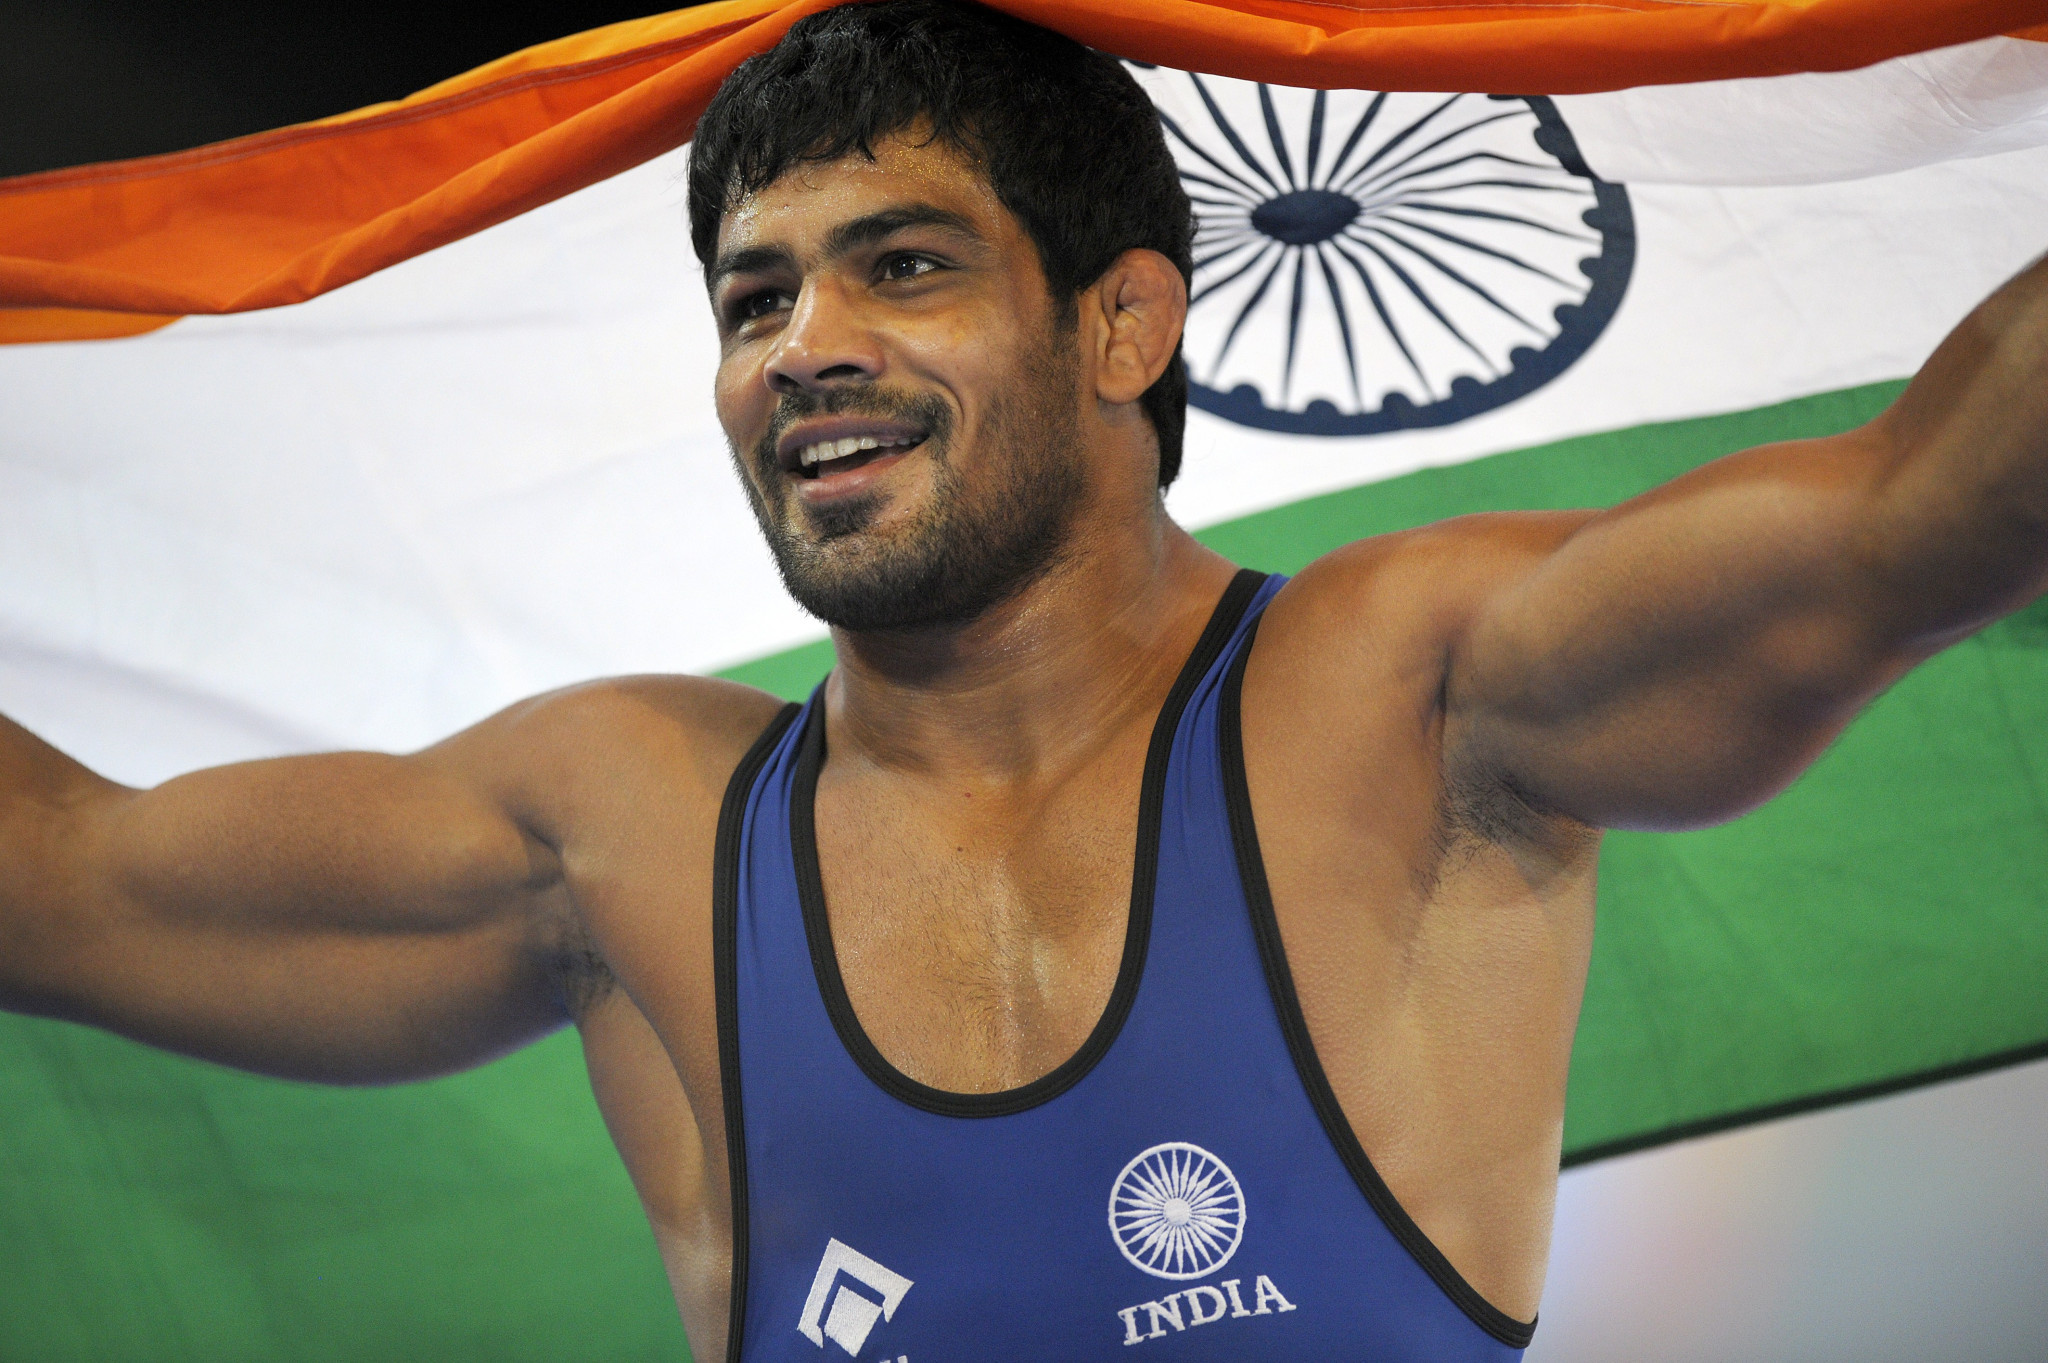 Olympic medallists Sushil Kumar, pictured, and Yogeshwar Dutt are expected to make their return to wrestling at next month’s Senior Indian National Championships in Indore ©Getty Images